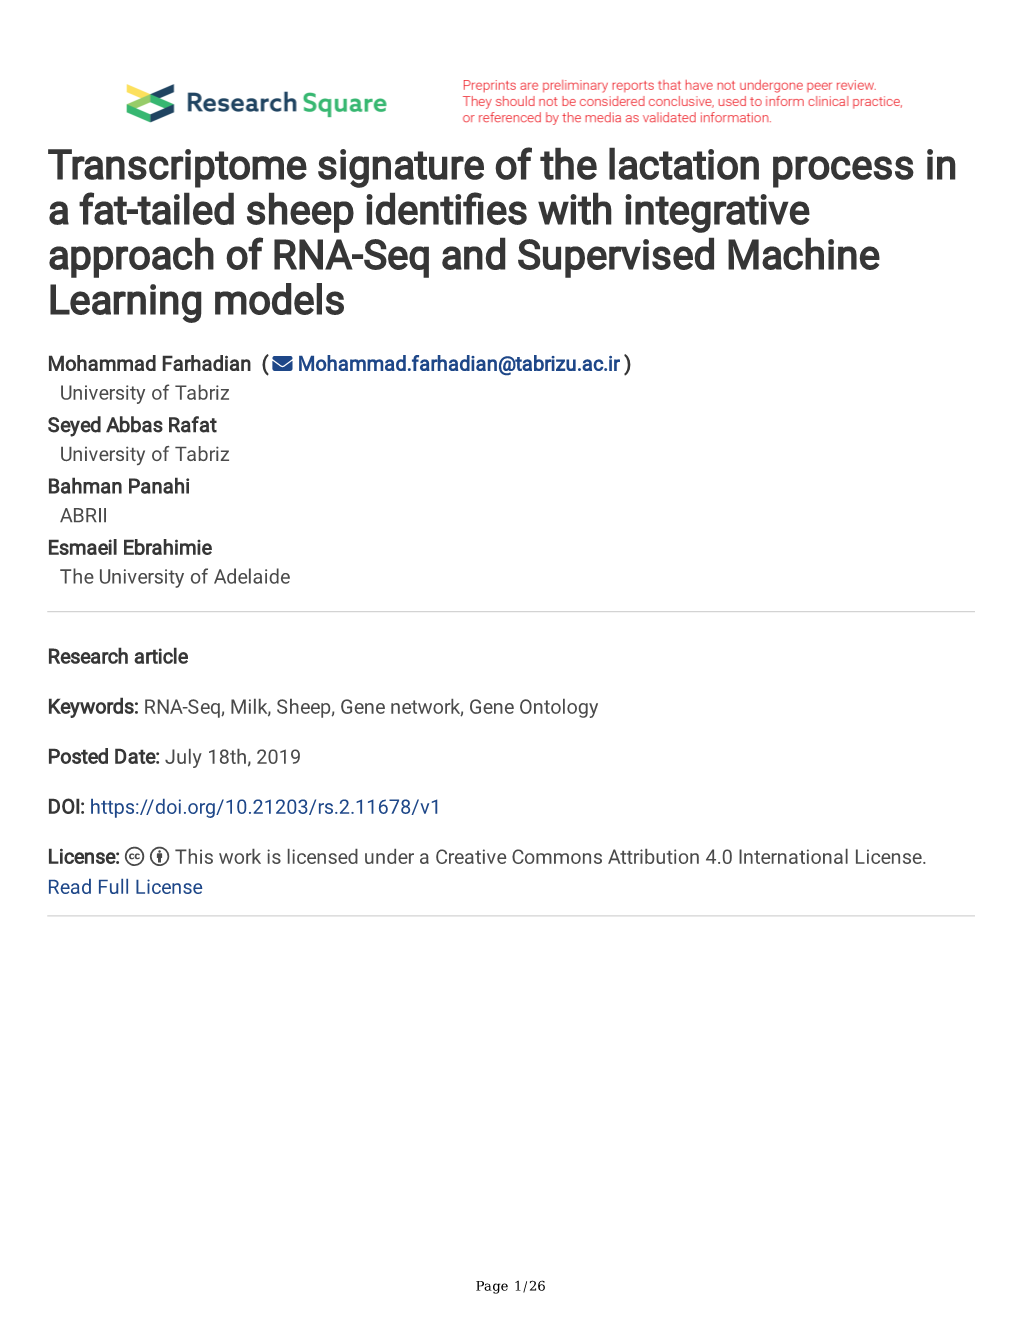 Transcriptome Signature of the Lactation Process in a Fat-Tailed Sheep Identifes with Integrative Approach of RNA-Seq and Supervised Machine Learning Models